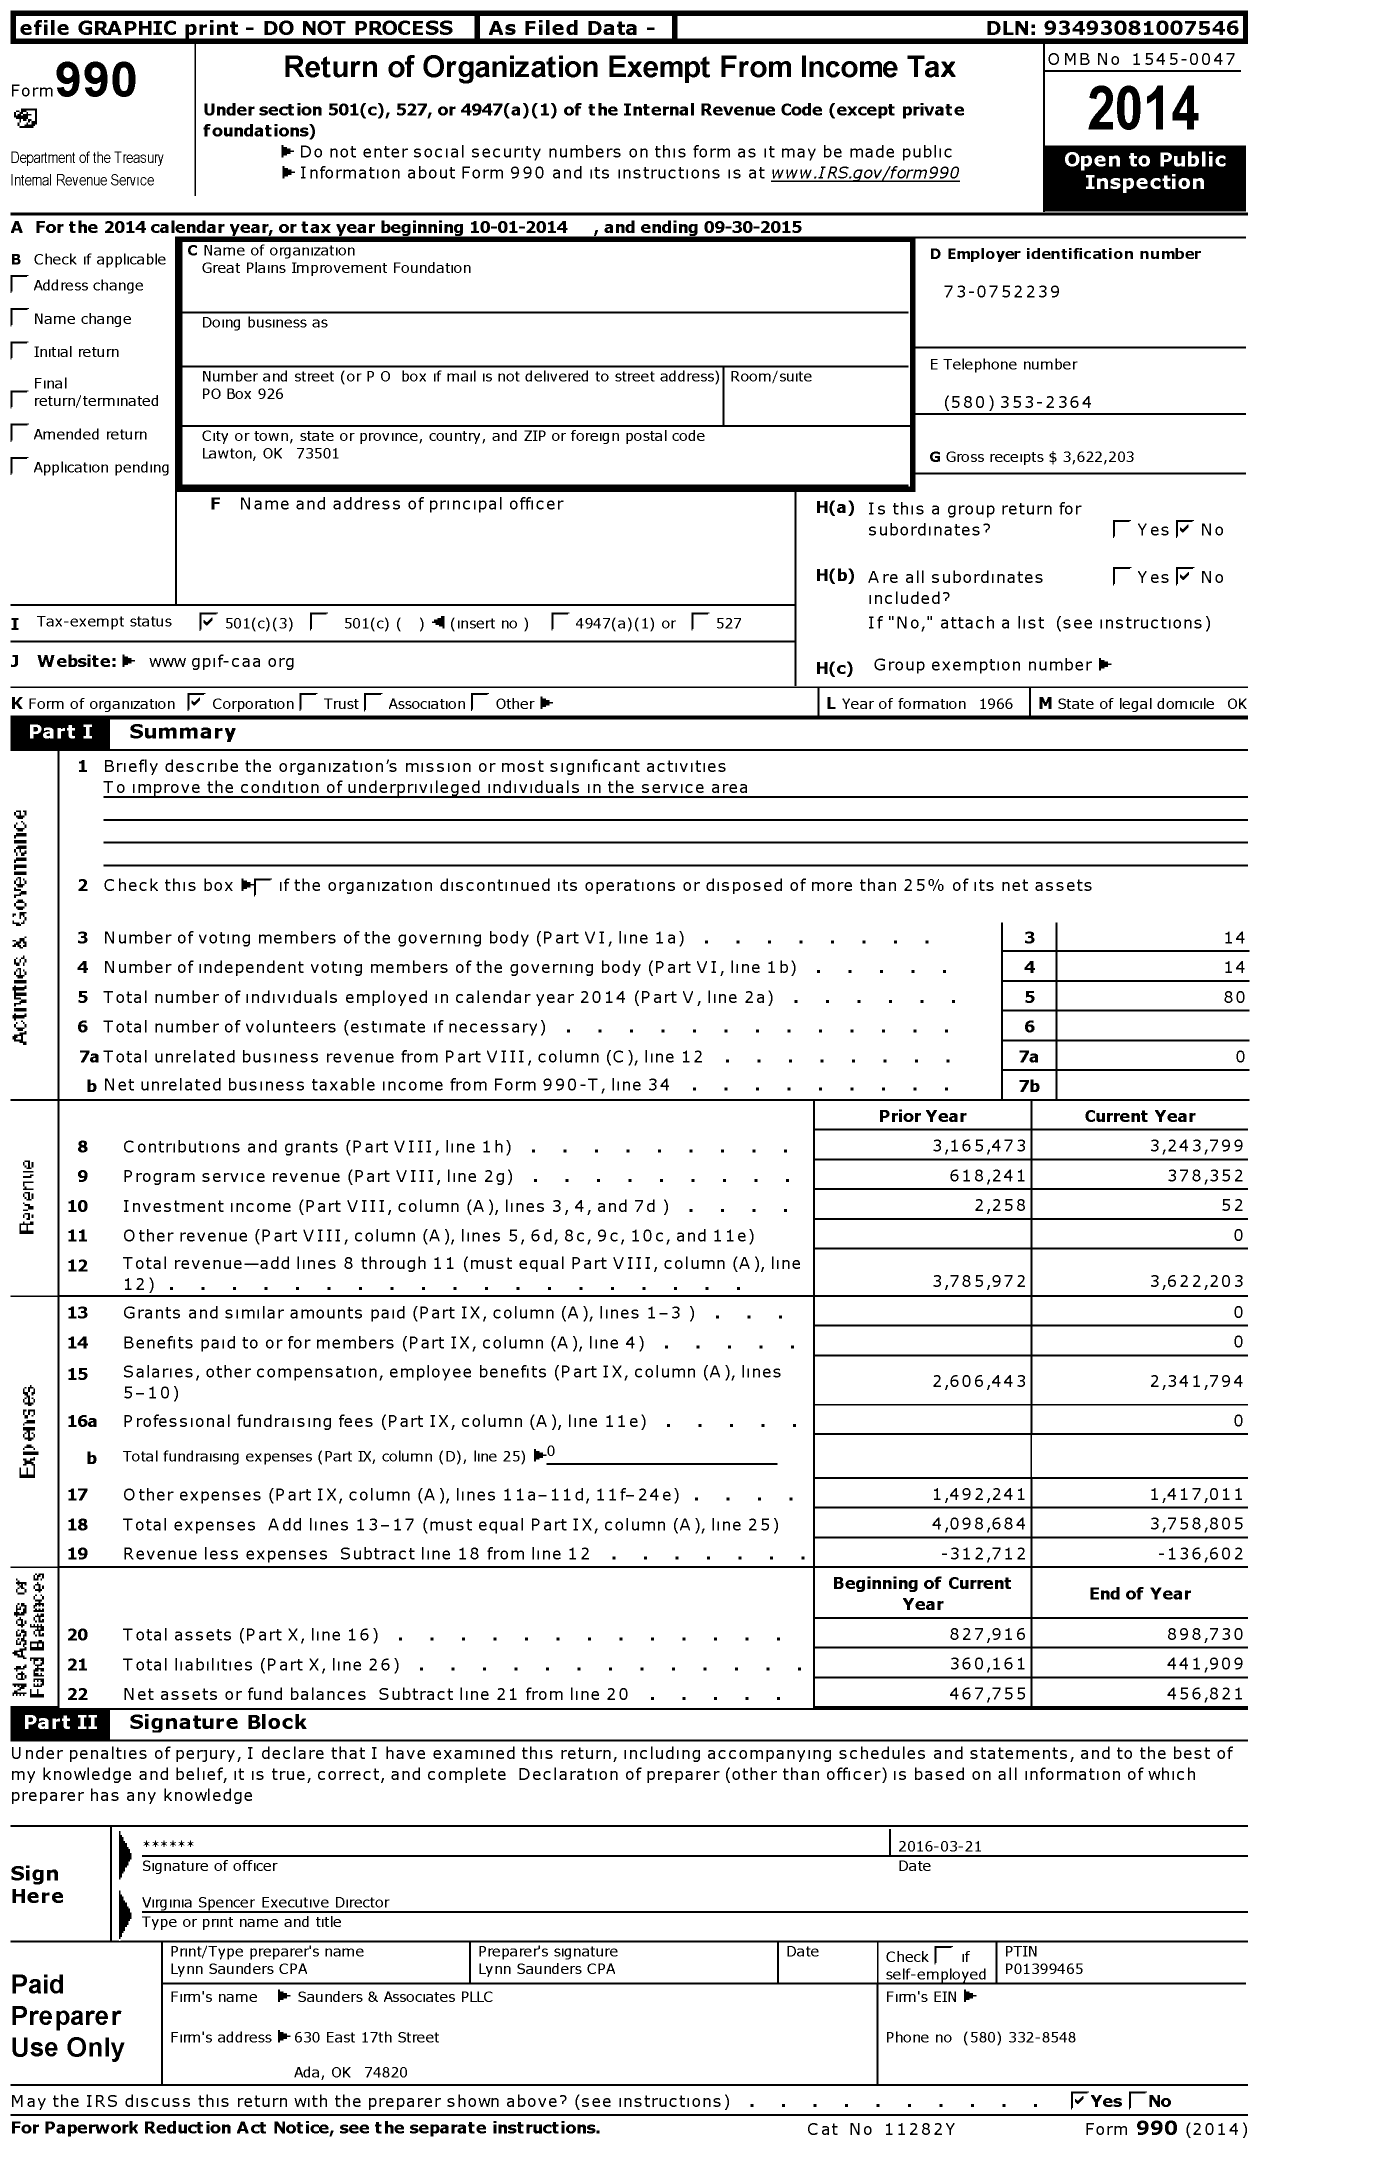 Image of first page of 2014 Form 990 for Great Plains Improvement Foundation